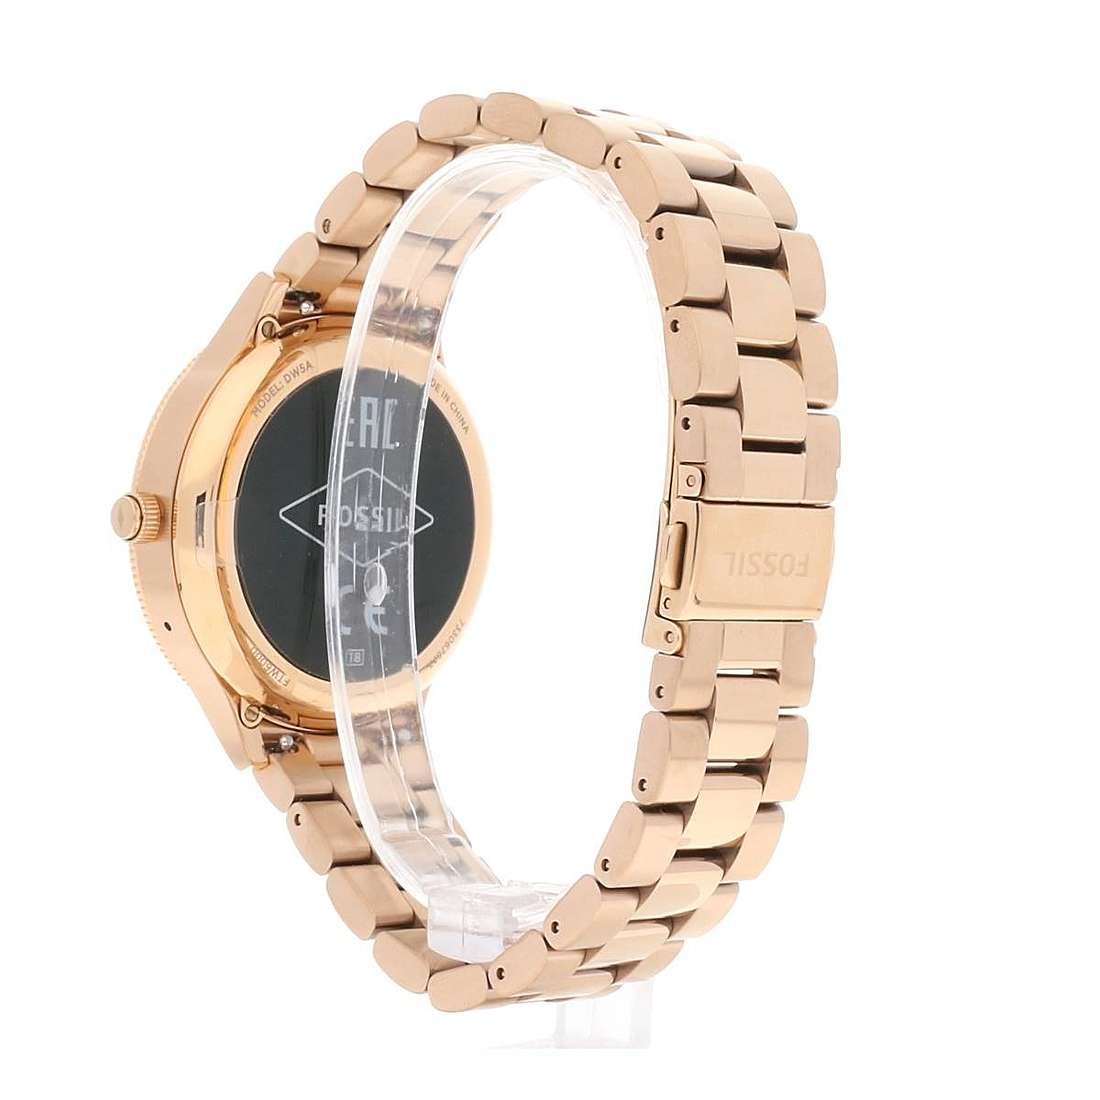 Offers watches woman Fossil FTW6000